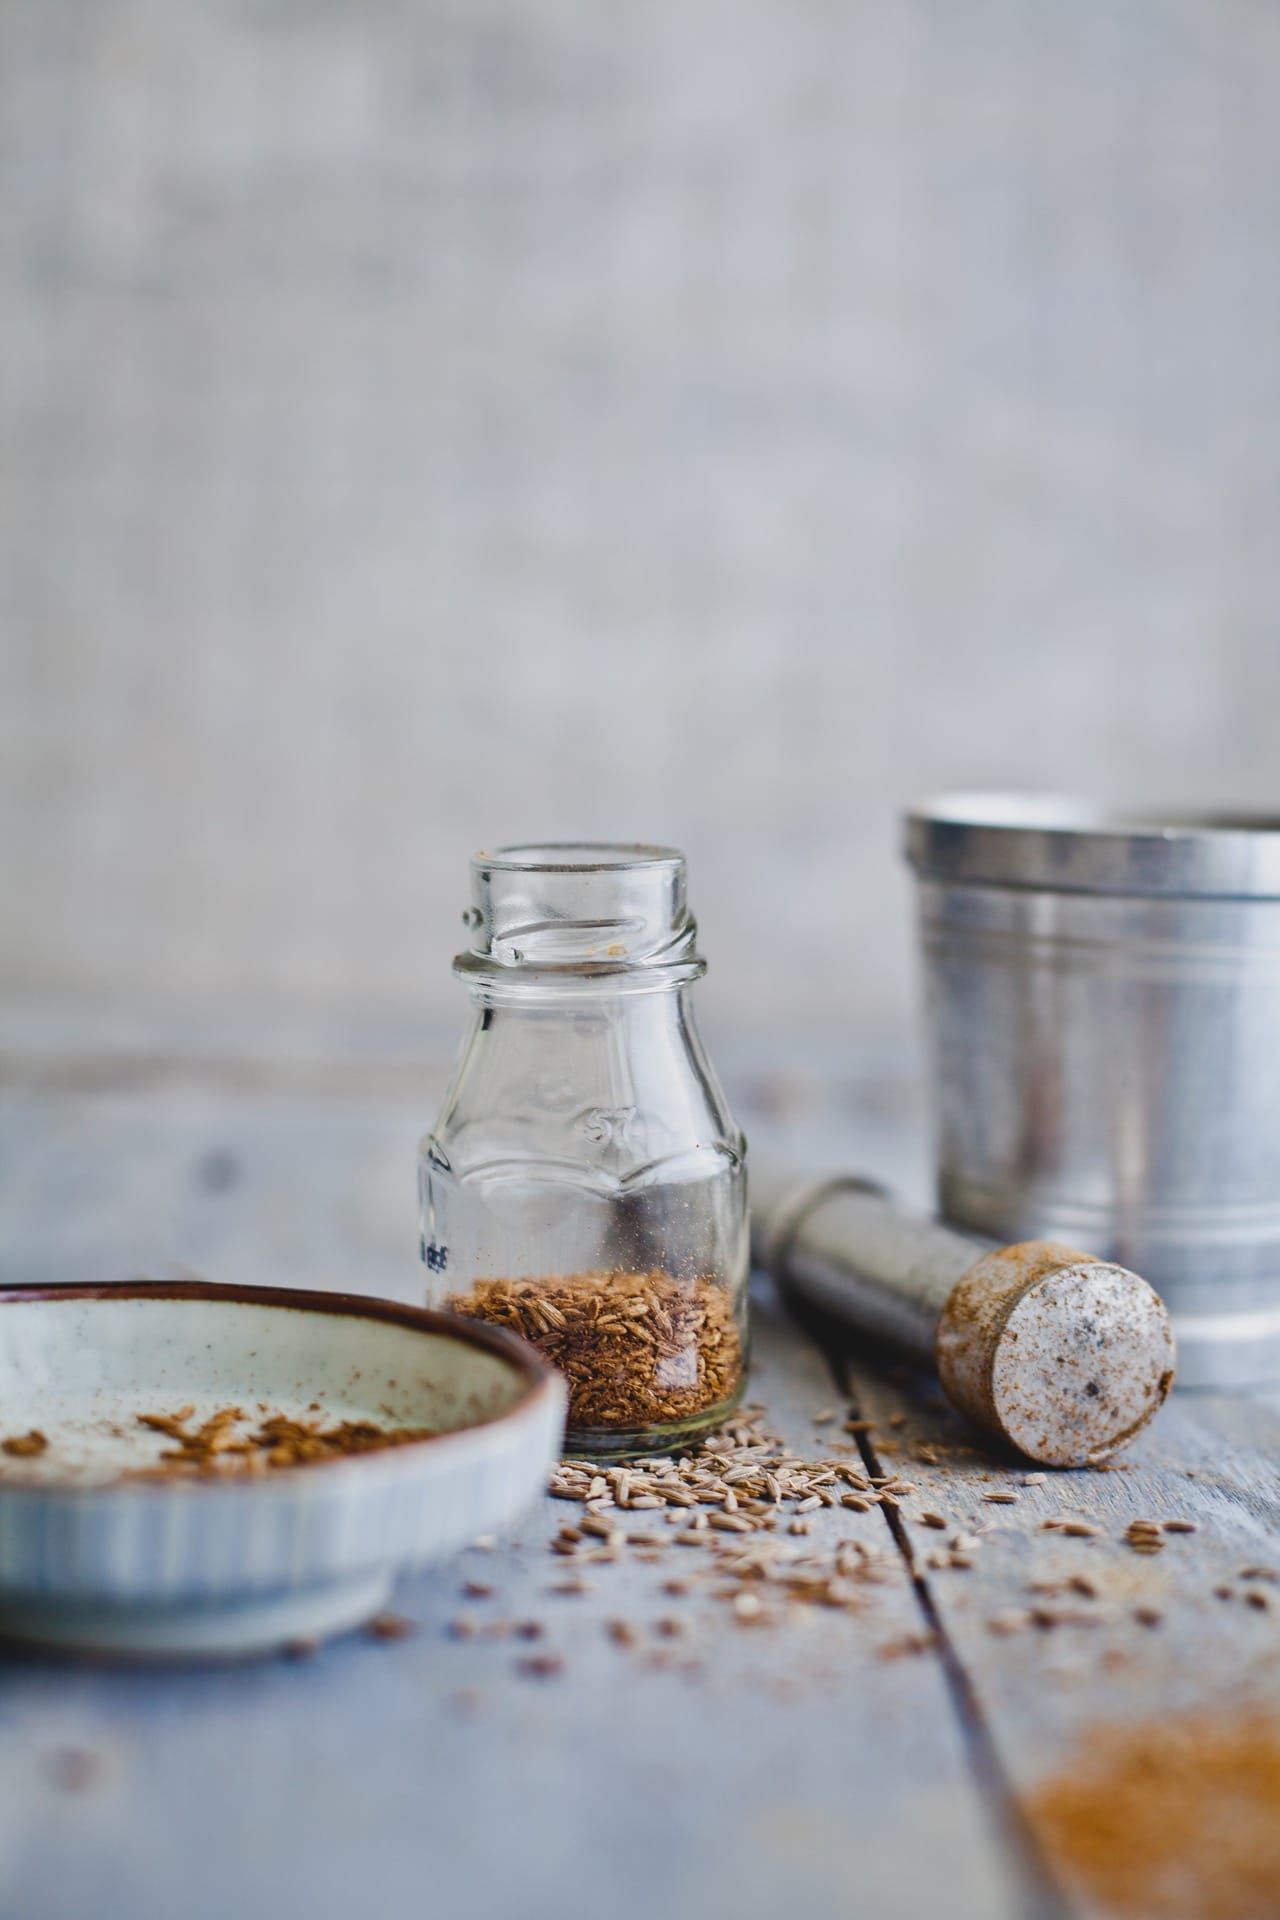 Roughly crushed roasted cumin seeds | Playful Cooking